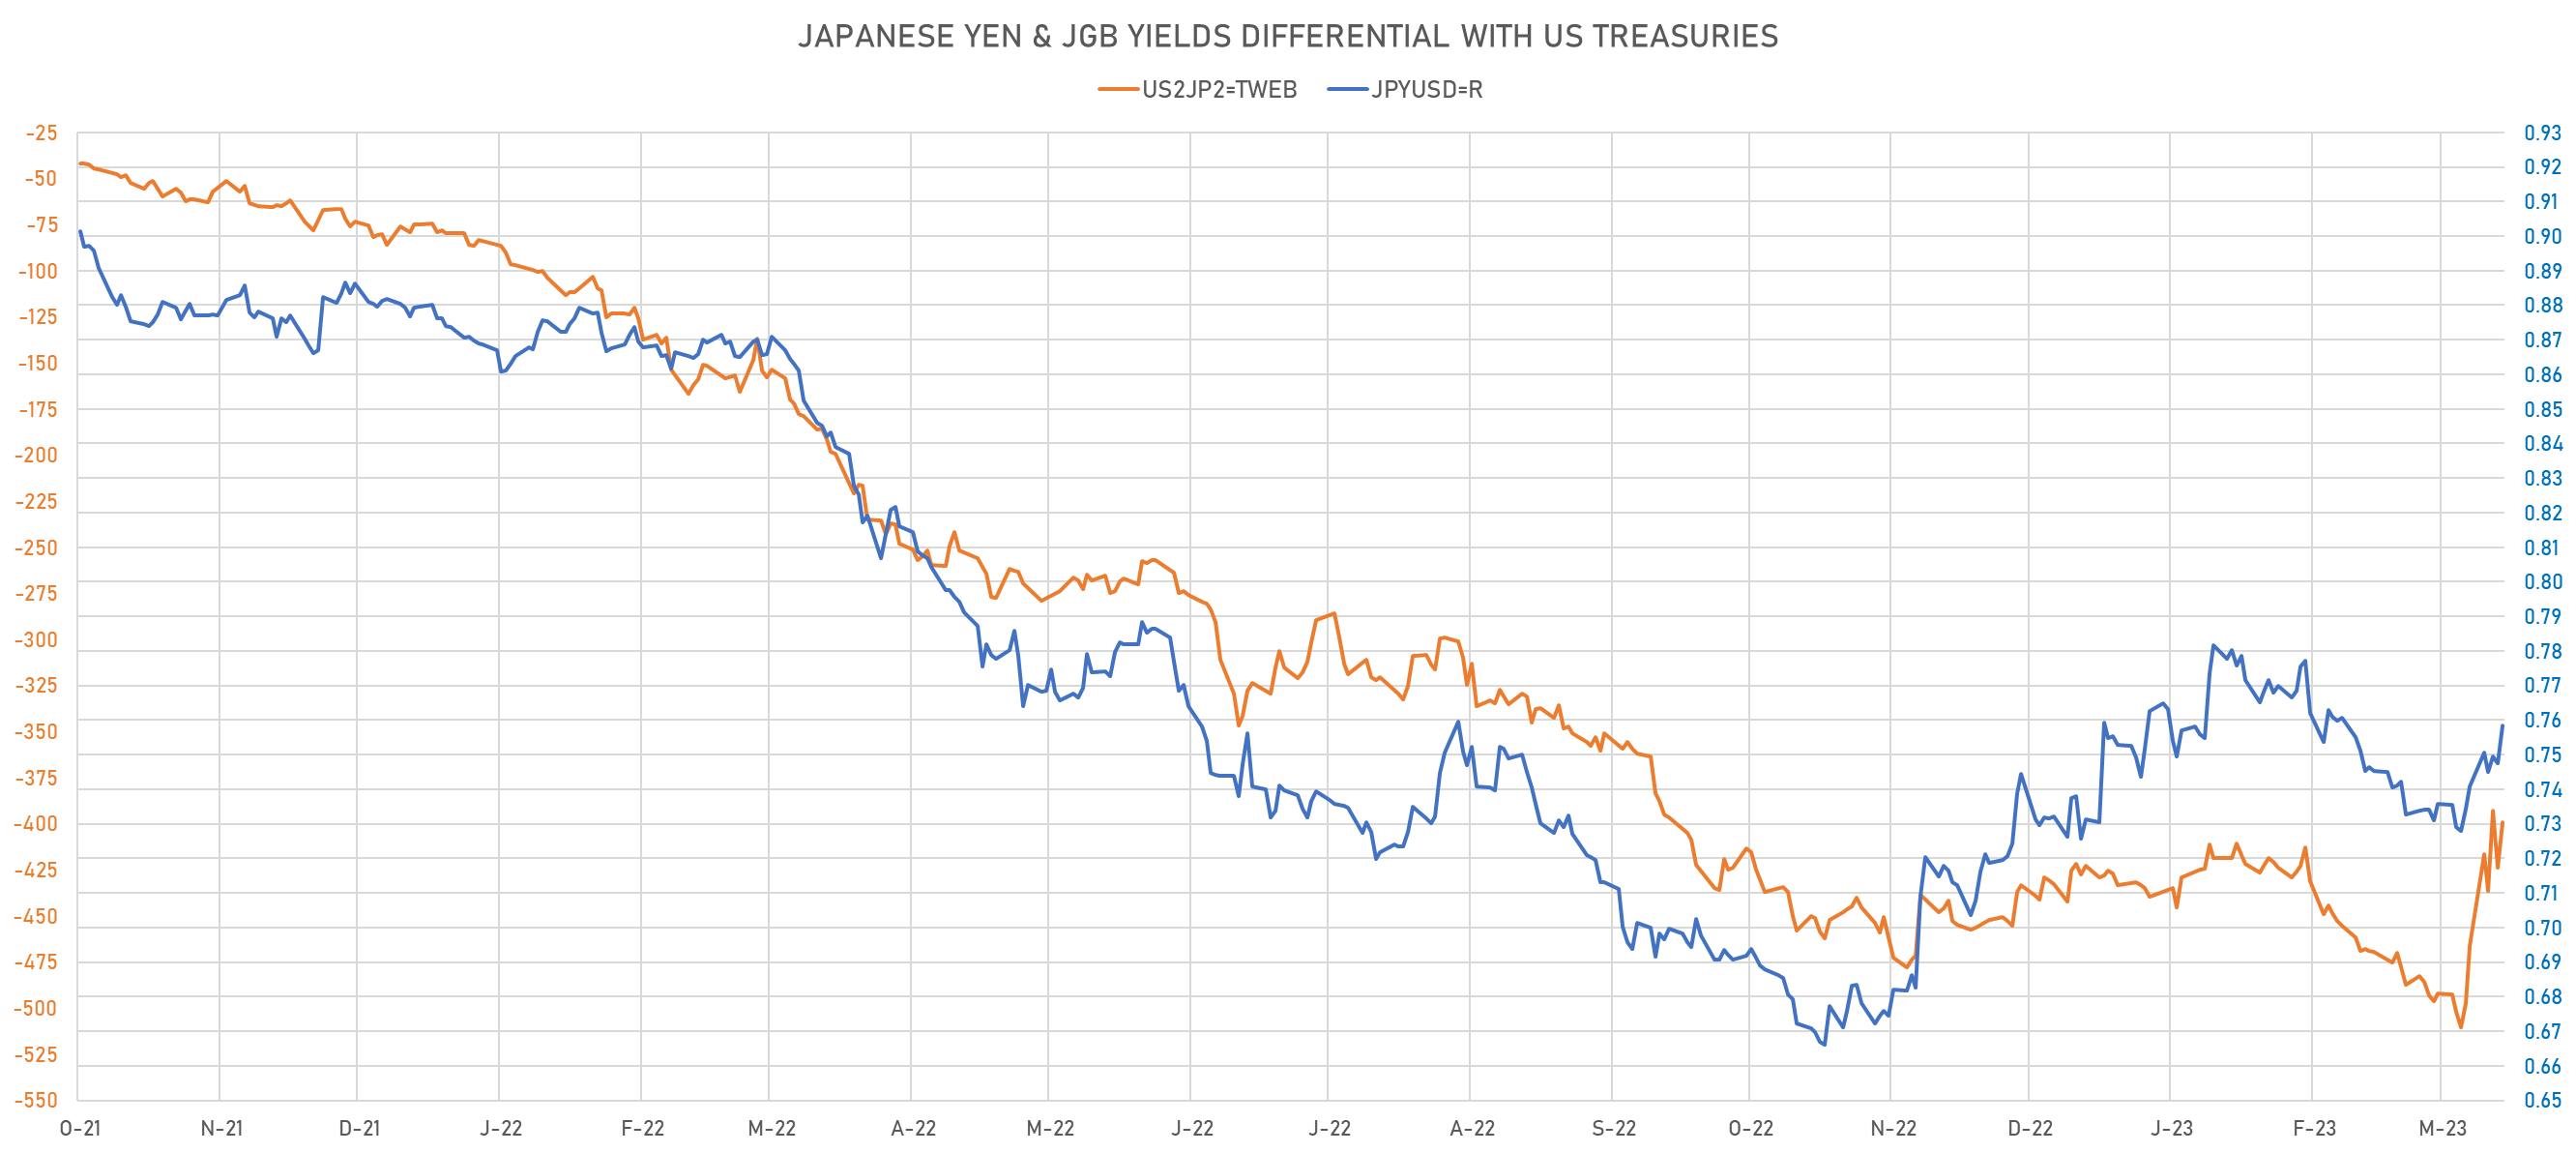 Japanese Yen and 2Y Treasury Rates differential | Sources: phipost.com, Refinitiv data